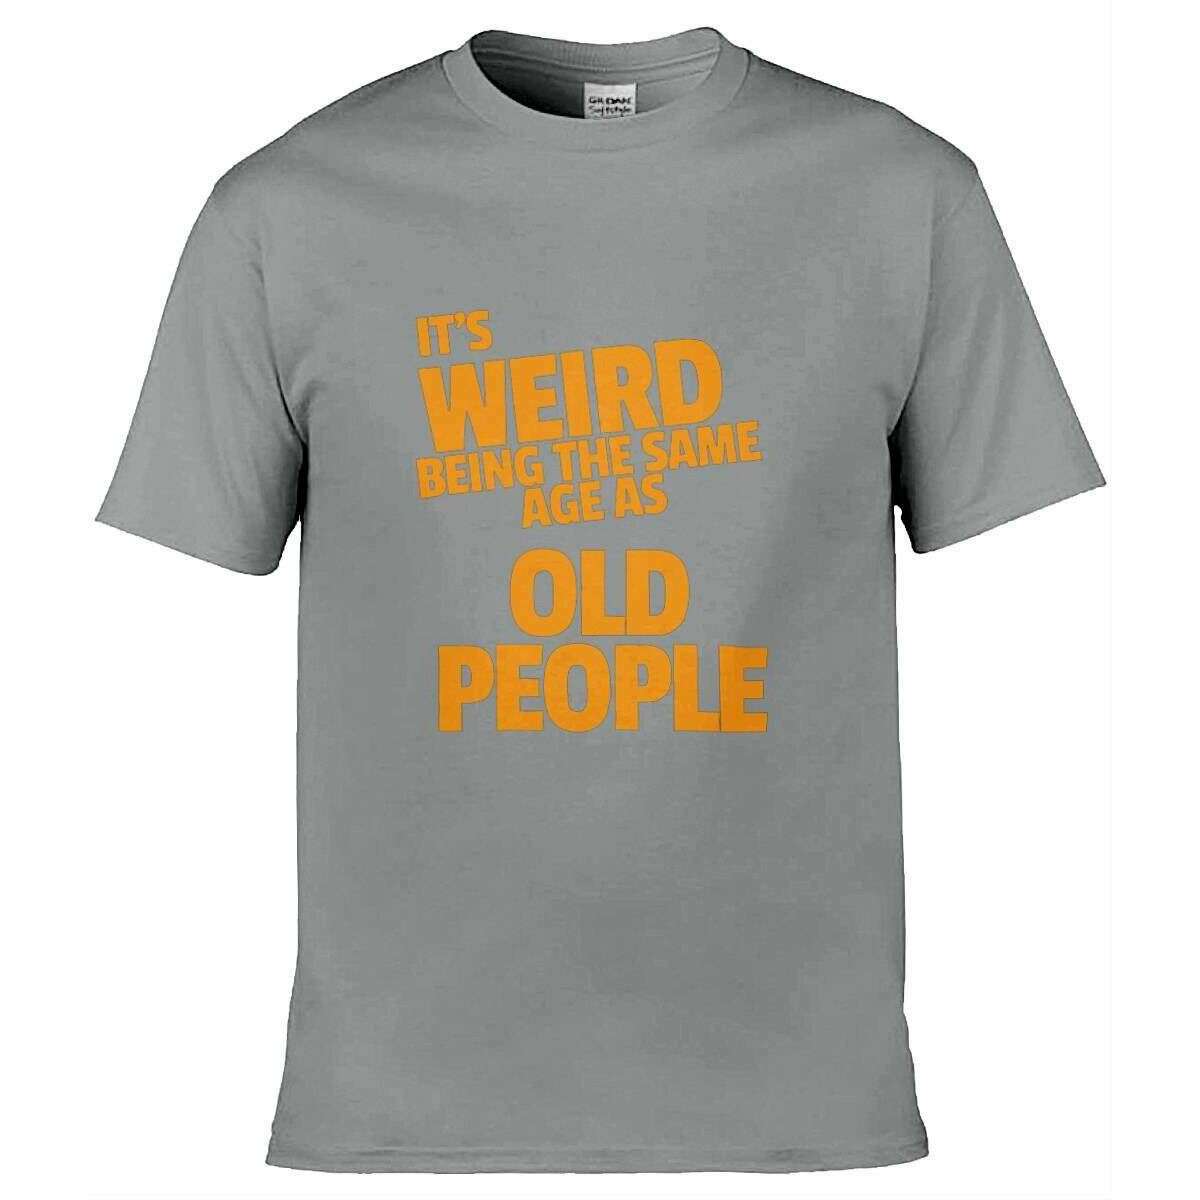 Teemarkable! It’s Weird Being The Same Age As Old People T-Shirt